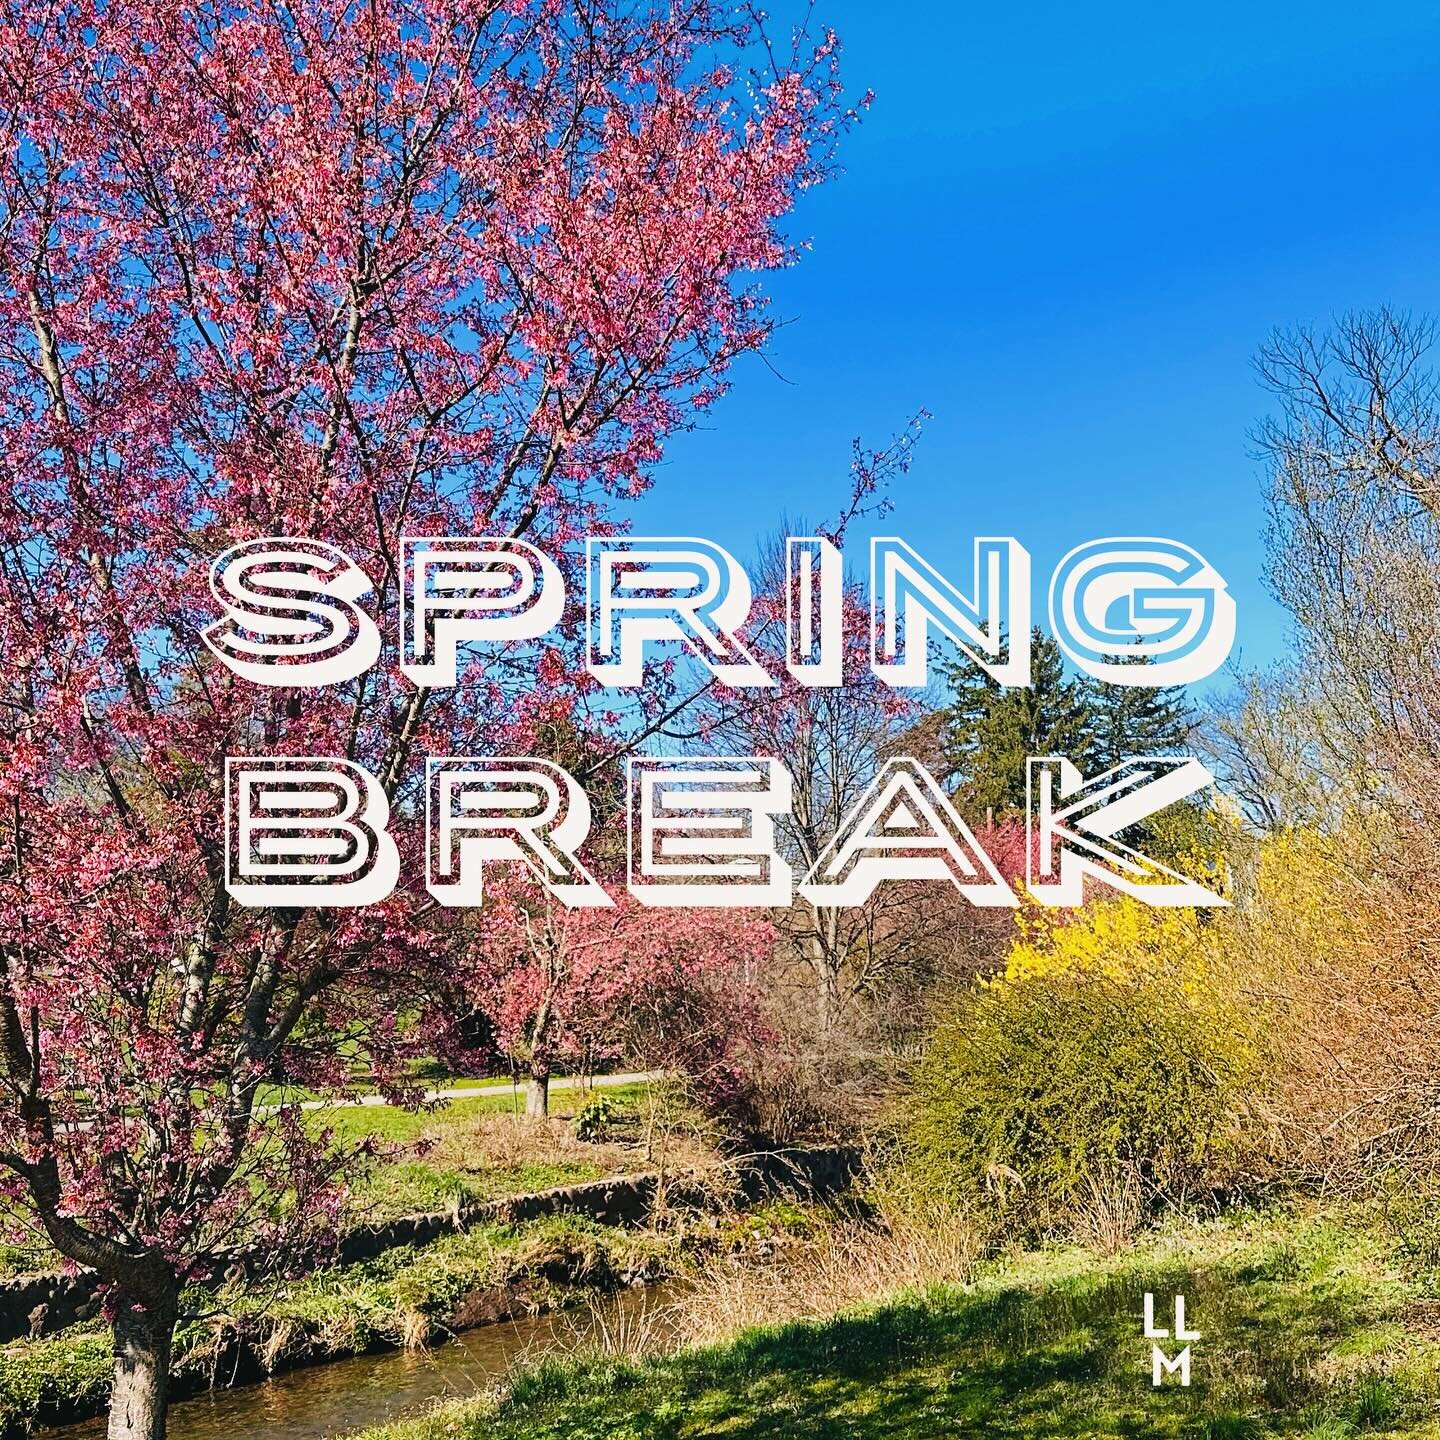 ✌️🌸🌳 Hope you have a great spring break friends! Taking some time off with my family. See you in a week 🌳🌸✌️ #livelovemaplewood #maplewoodnj #mapso #soma #maplewood